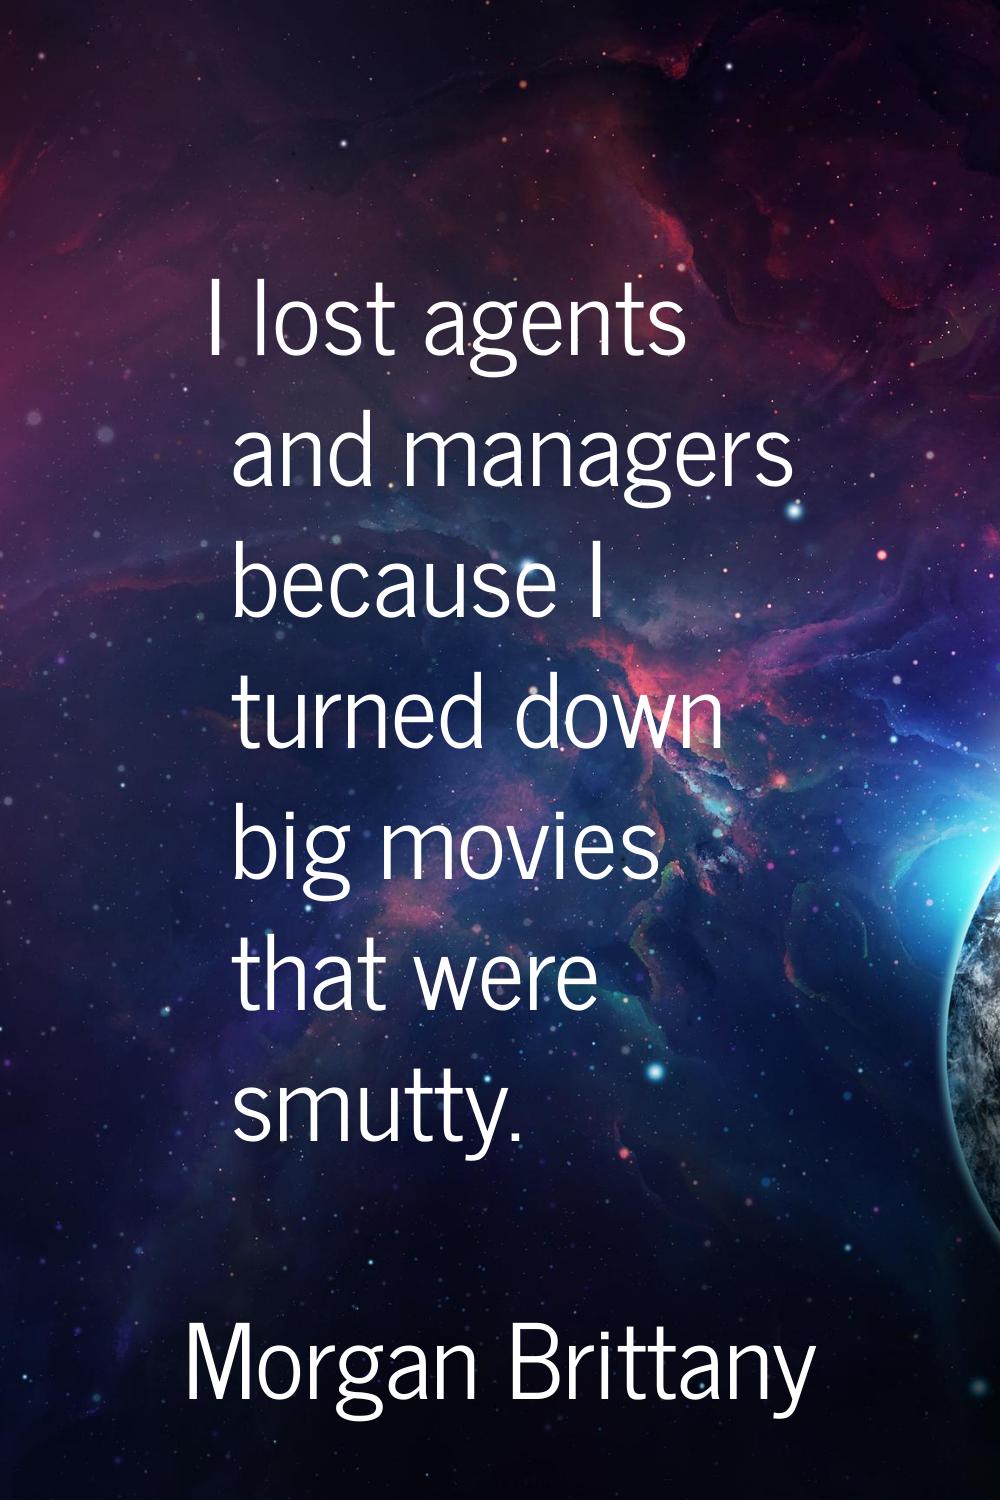 I lost agents and managers because I turned down big movies that were smutty.